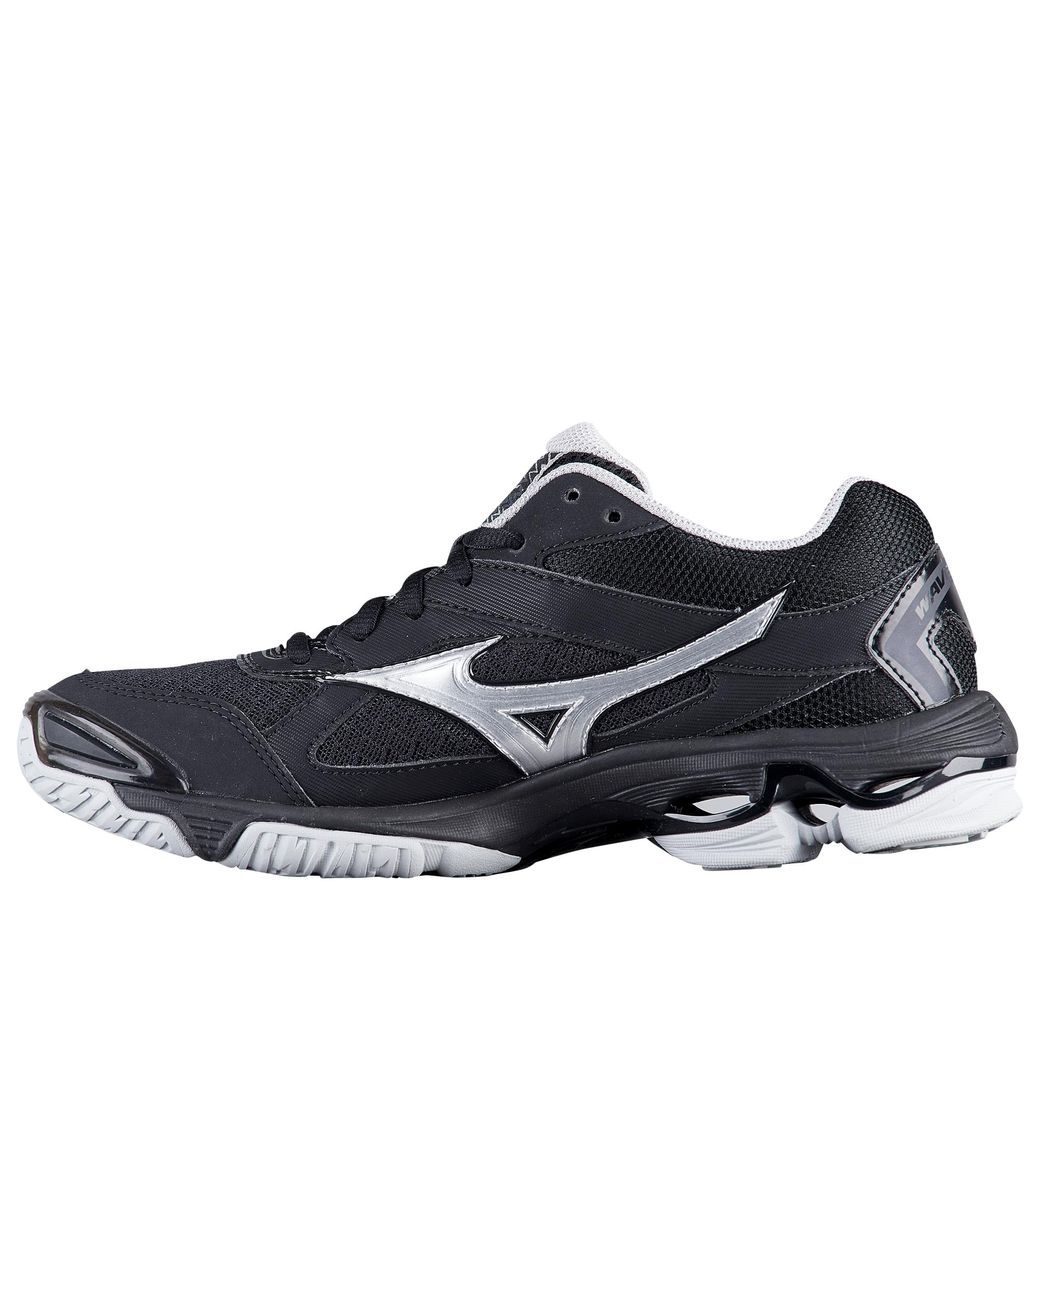 eastbay mizuno volleyball shoes Limit 